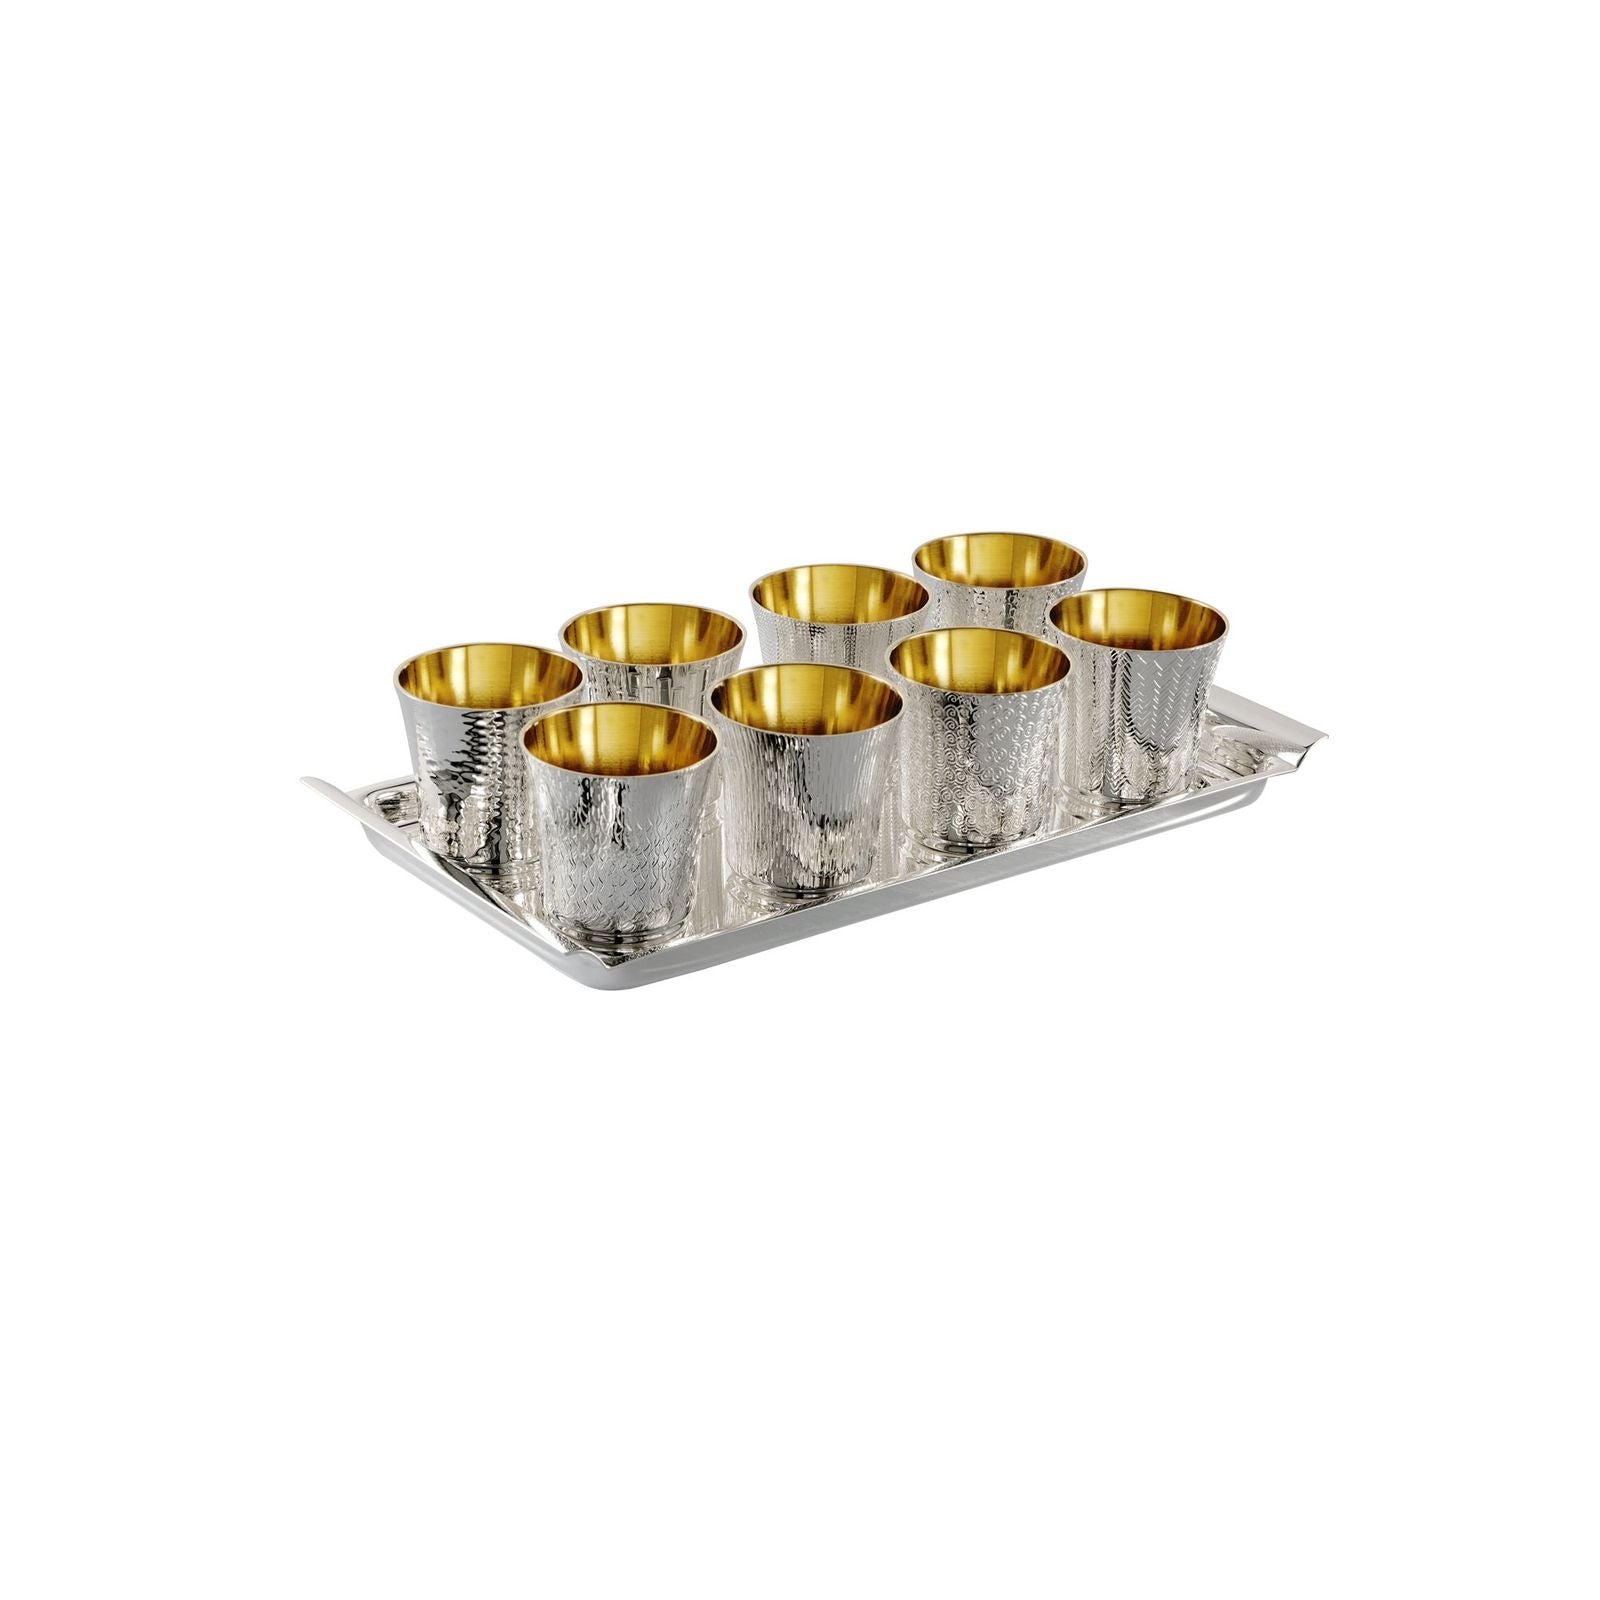 Zanetto Scacciapensieri Liquor Set with Shot Glasses and Shiny Smooth Tray | Exquisite Design, High-Quality Craftsmanship | Elegant Addition to Your Barware Collection | Explore a Range of Luxury Bar Accessories at 2Jour Concierge, #1 luxury high-end gift & lifestyle shop